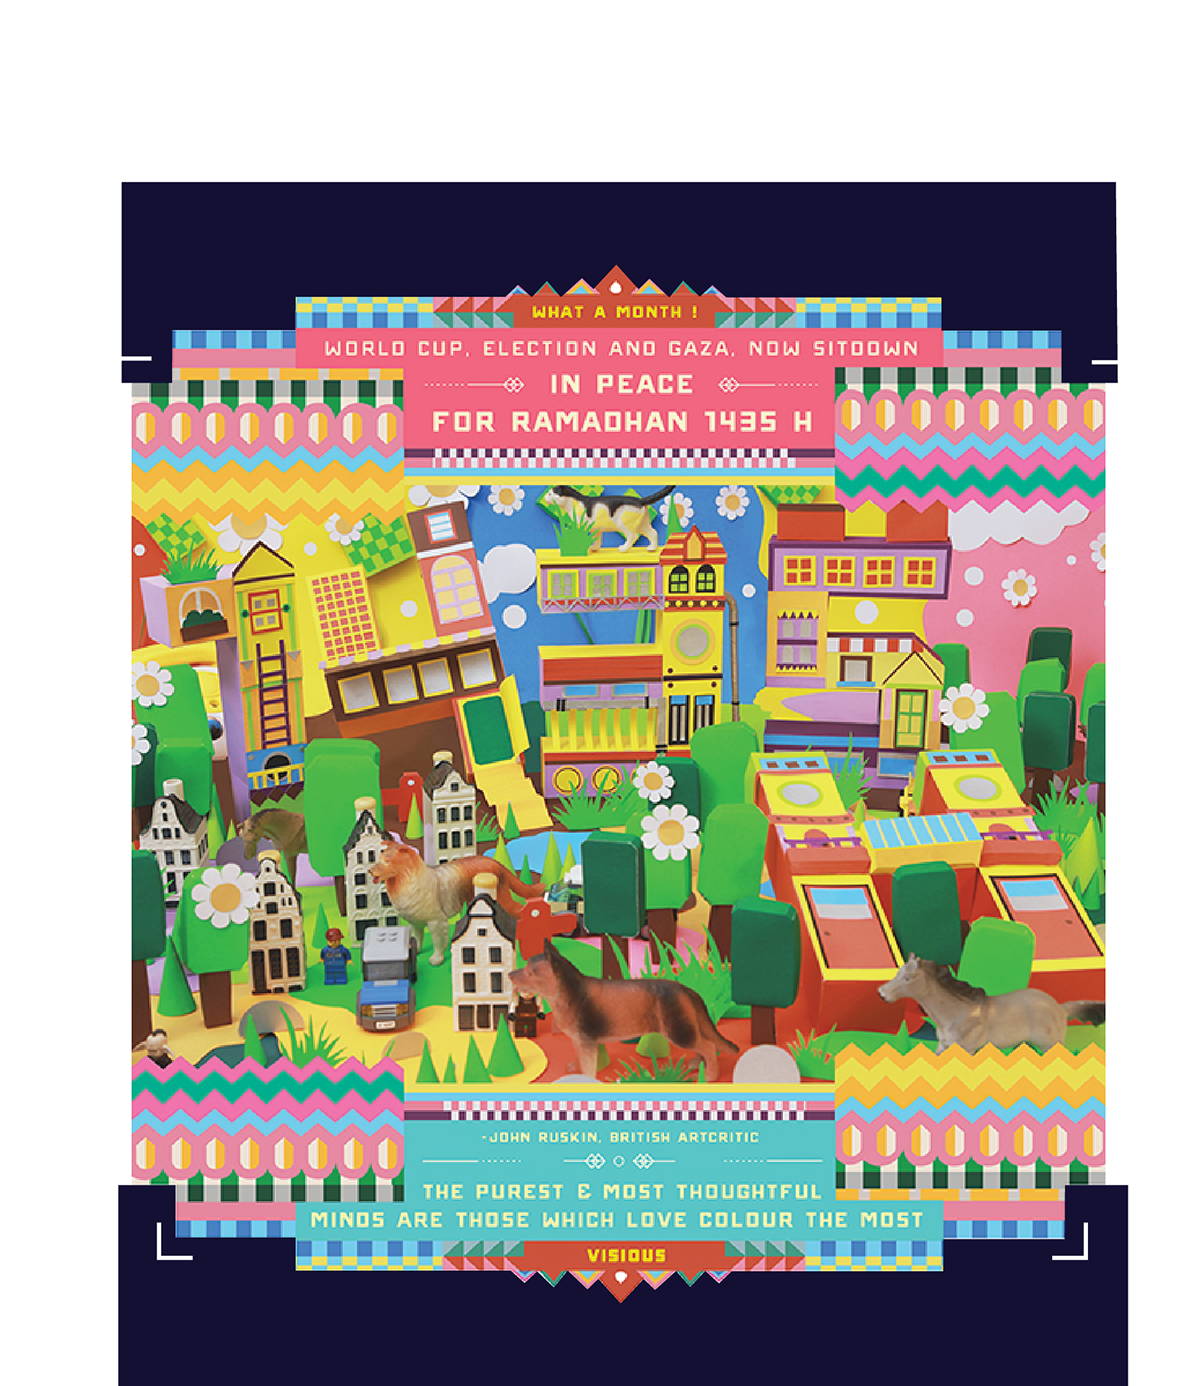 paper craft colour city scape craft building greeting cards Eid al-Fitr indonesia festive type graphic design bandung